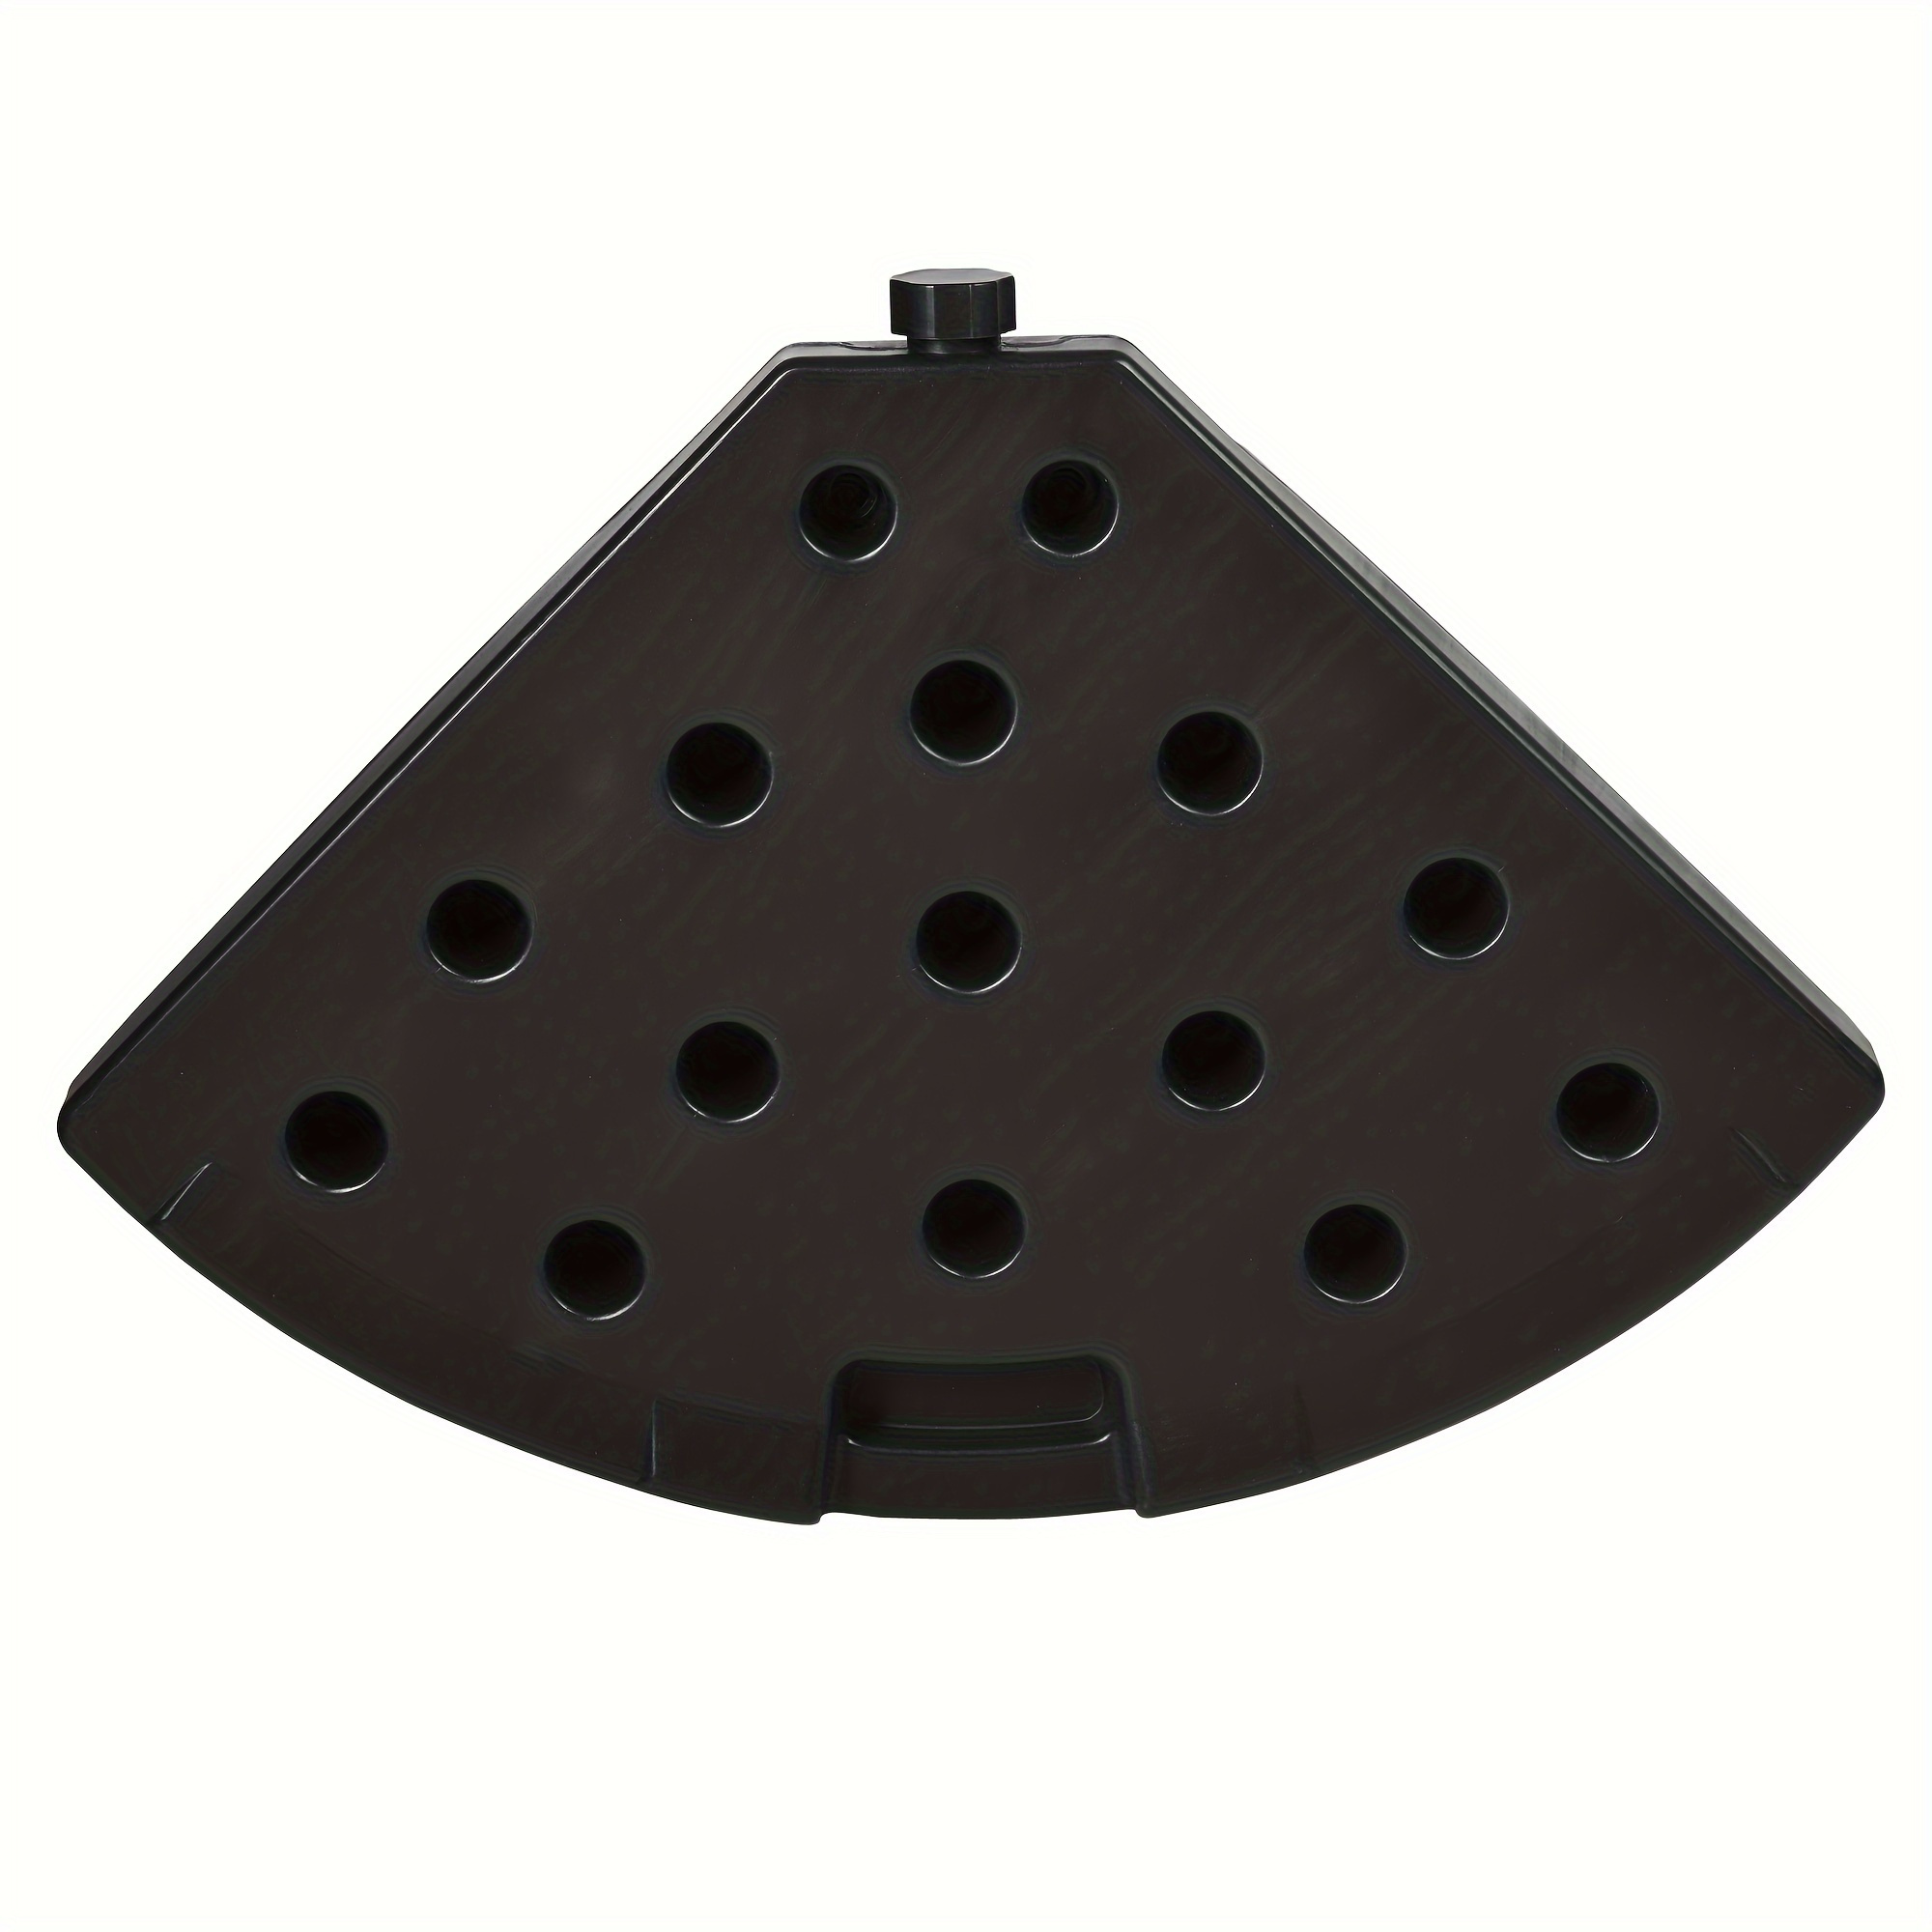 

Outsunny Hdpe Material Patio Umbrella Base Weights Sand Filled Up To 150 Lb. For Any Offset Umbrella Base | 4-piece, Water Or Sand Filled, All-weather, Black (round)